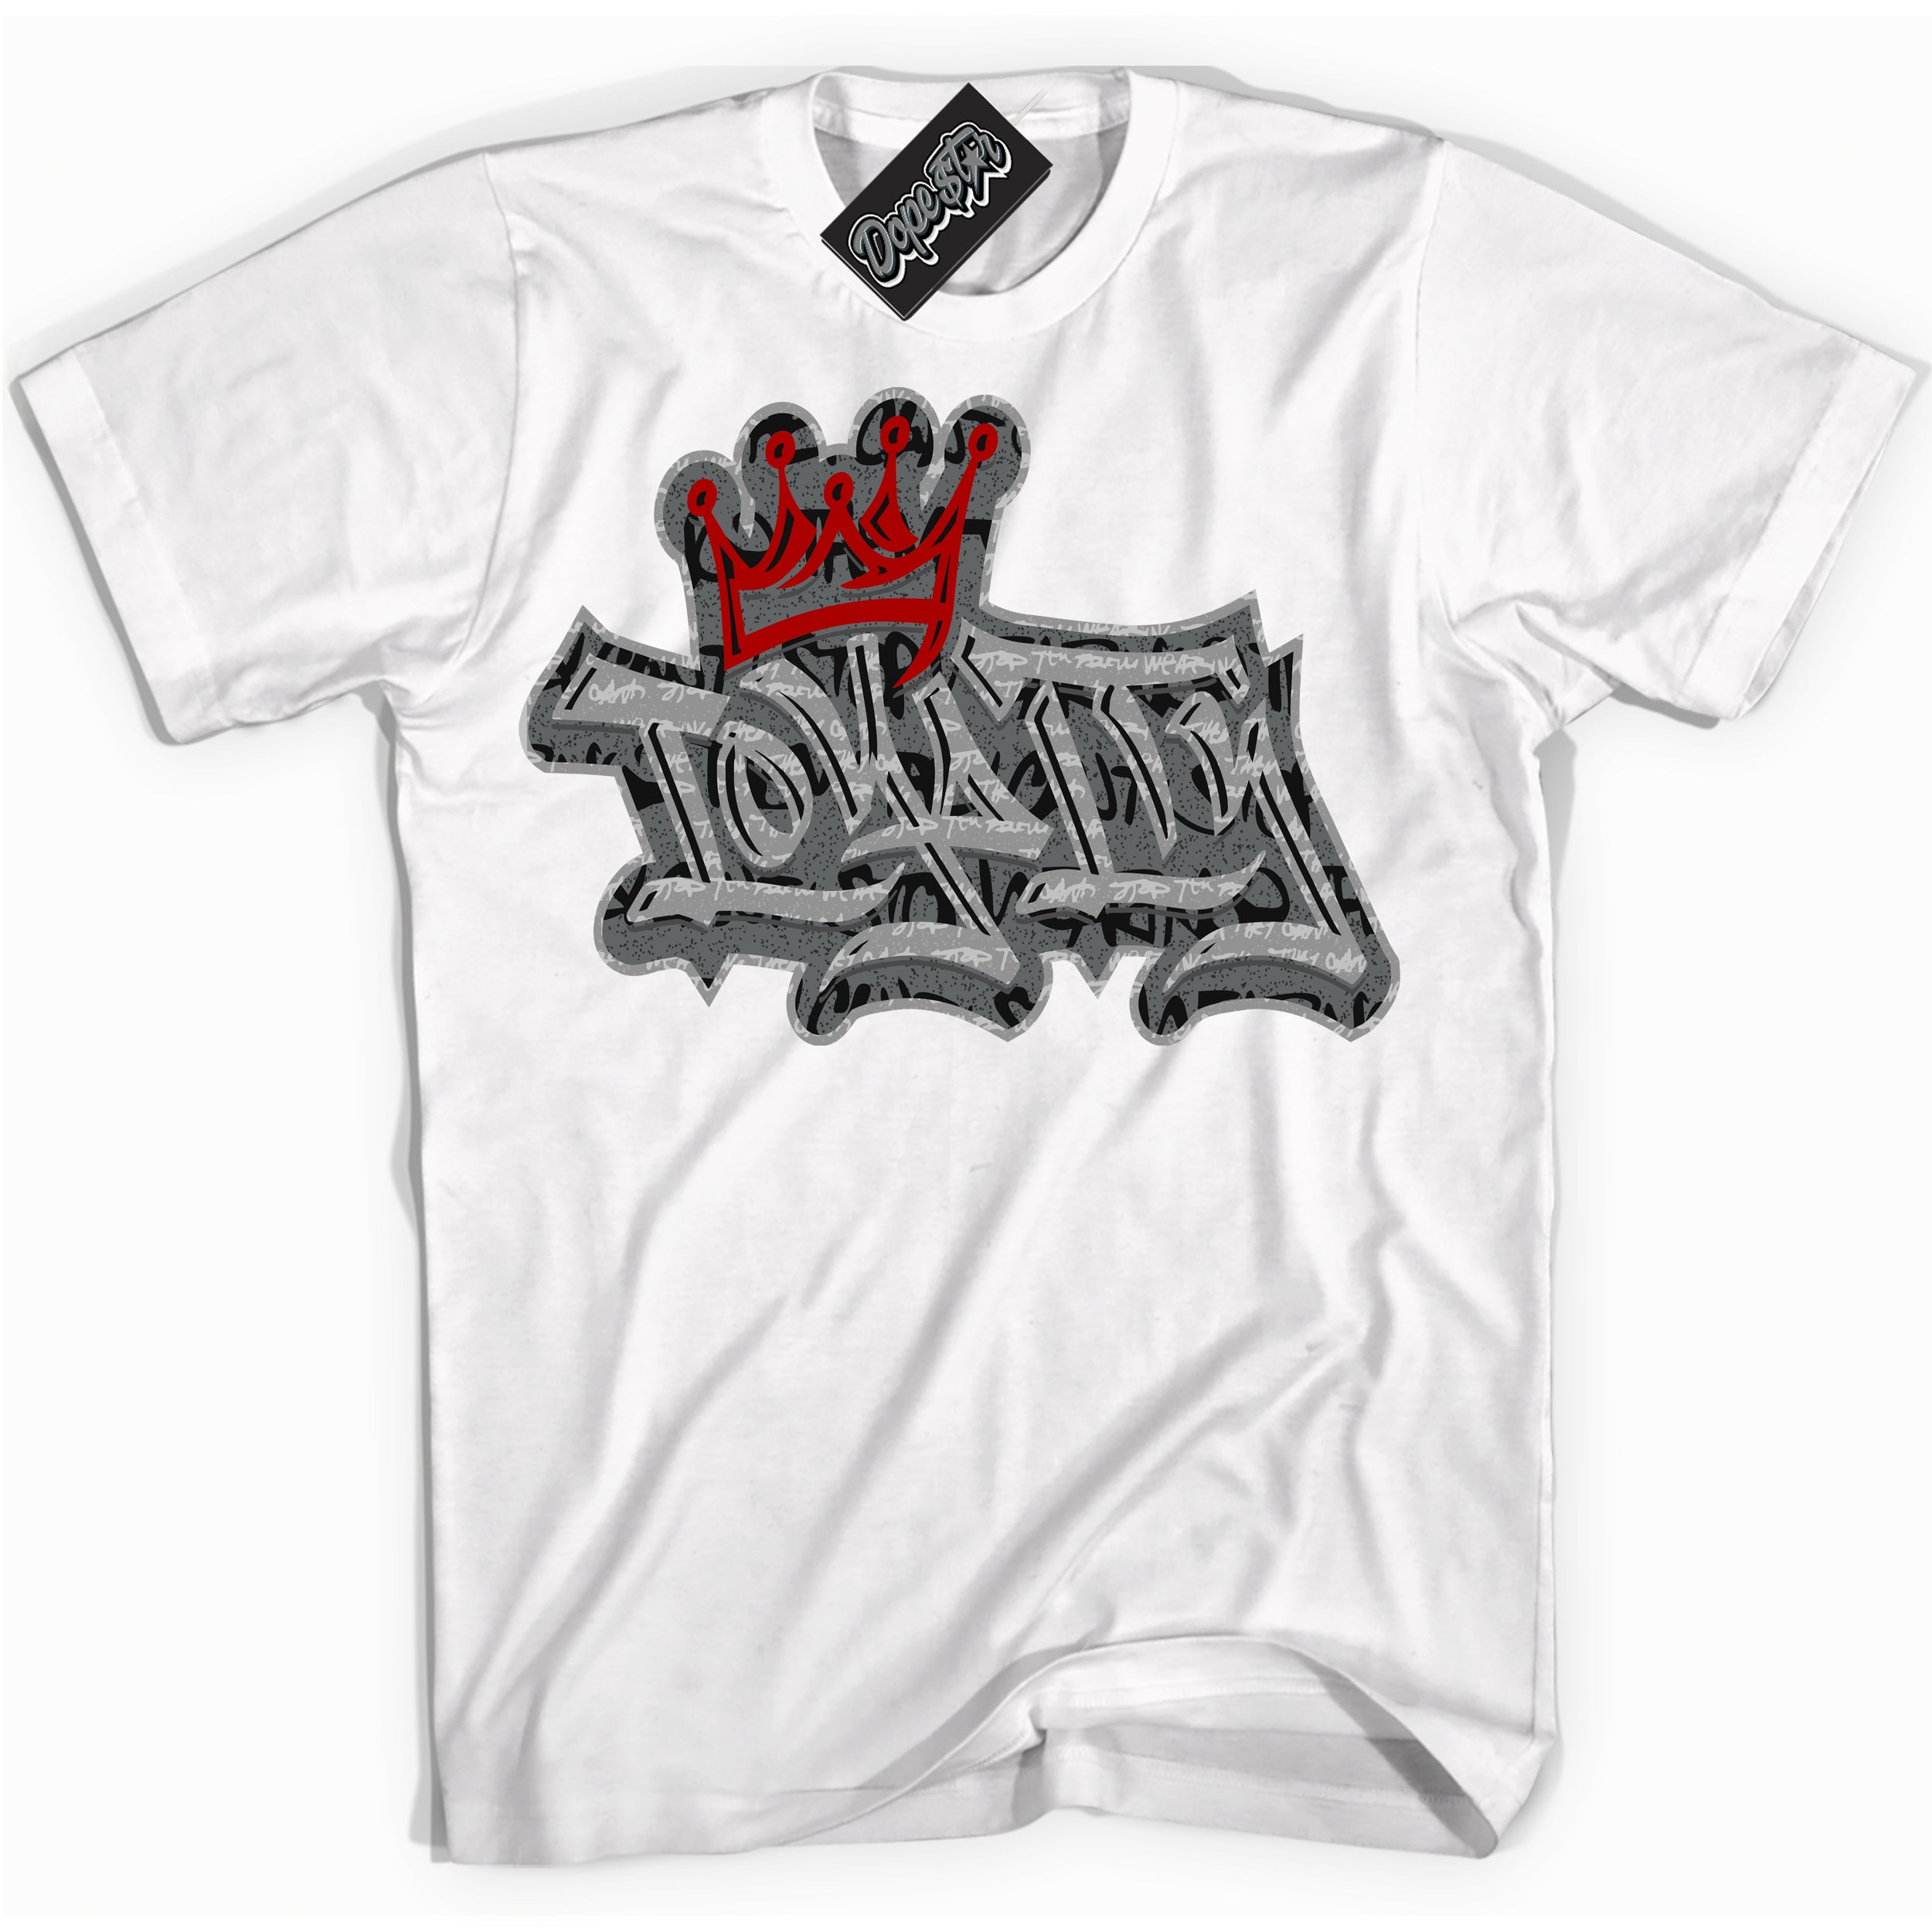 Cool White Shirt with “ Loyalty Crown ” design that perfectly matches Rebellionaire 1s Sneakers.